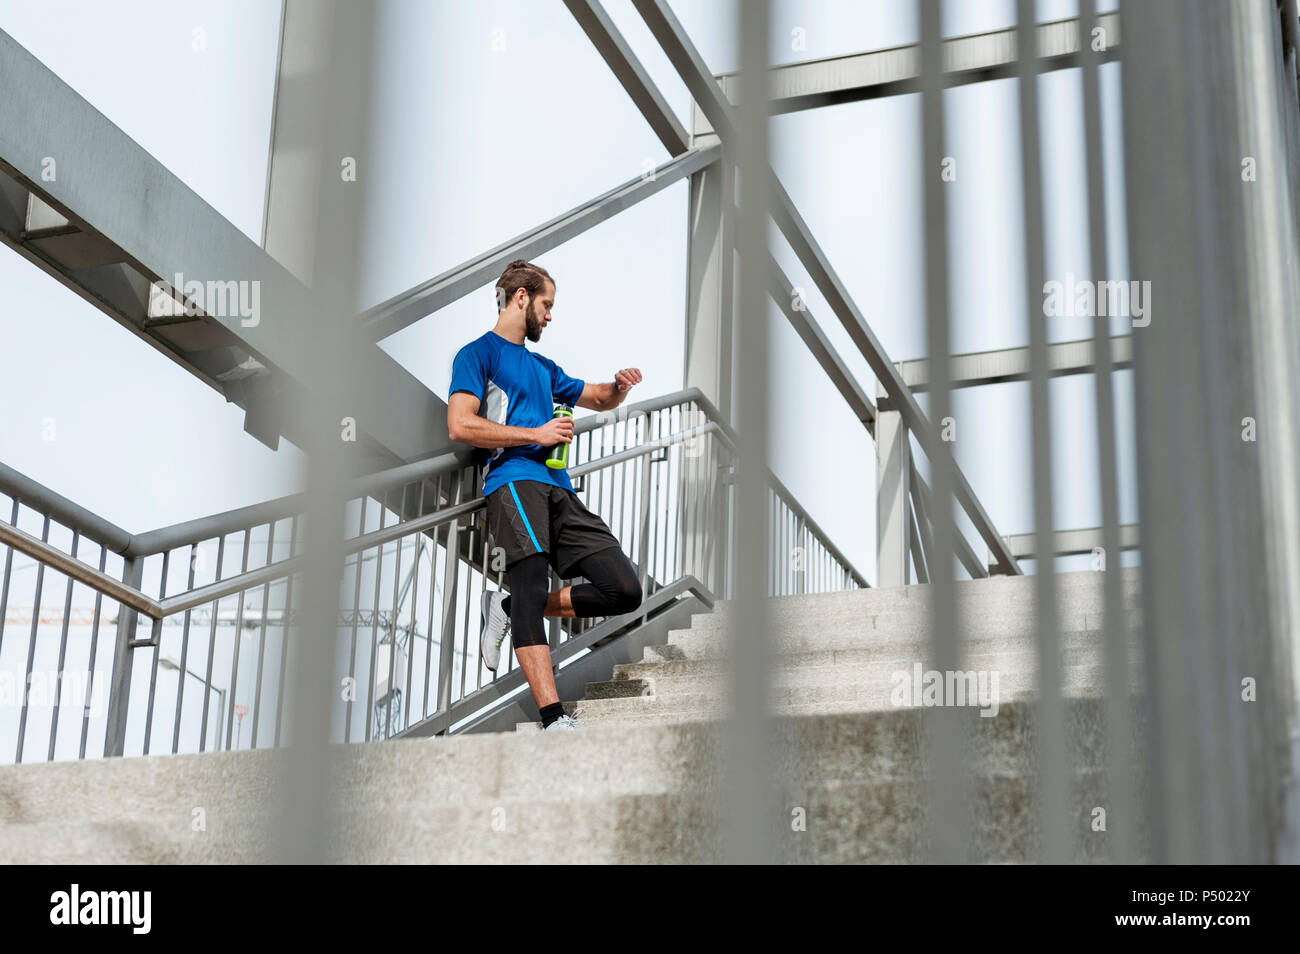 Man on stairs having a break from running Stock Photo